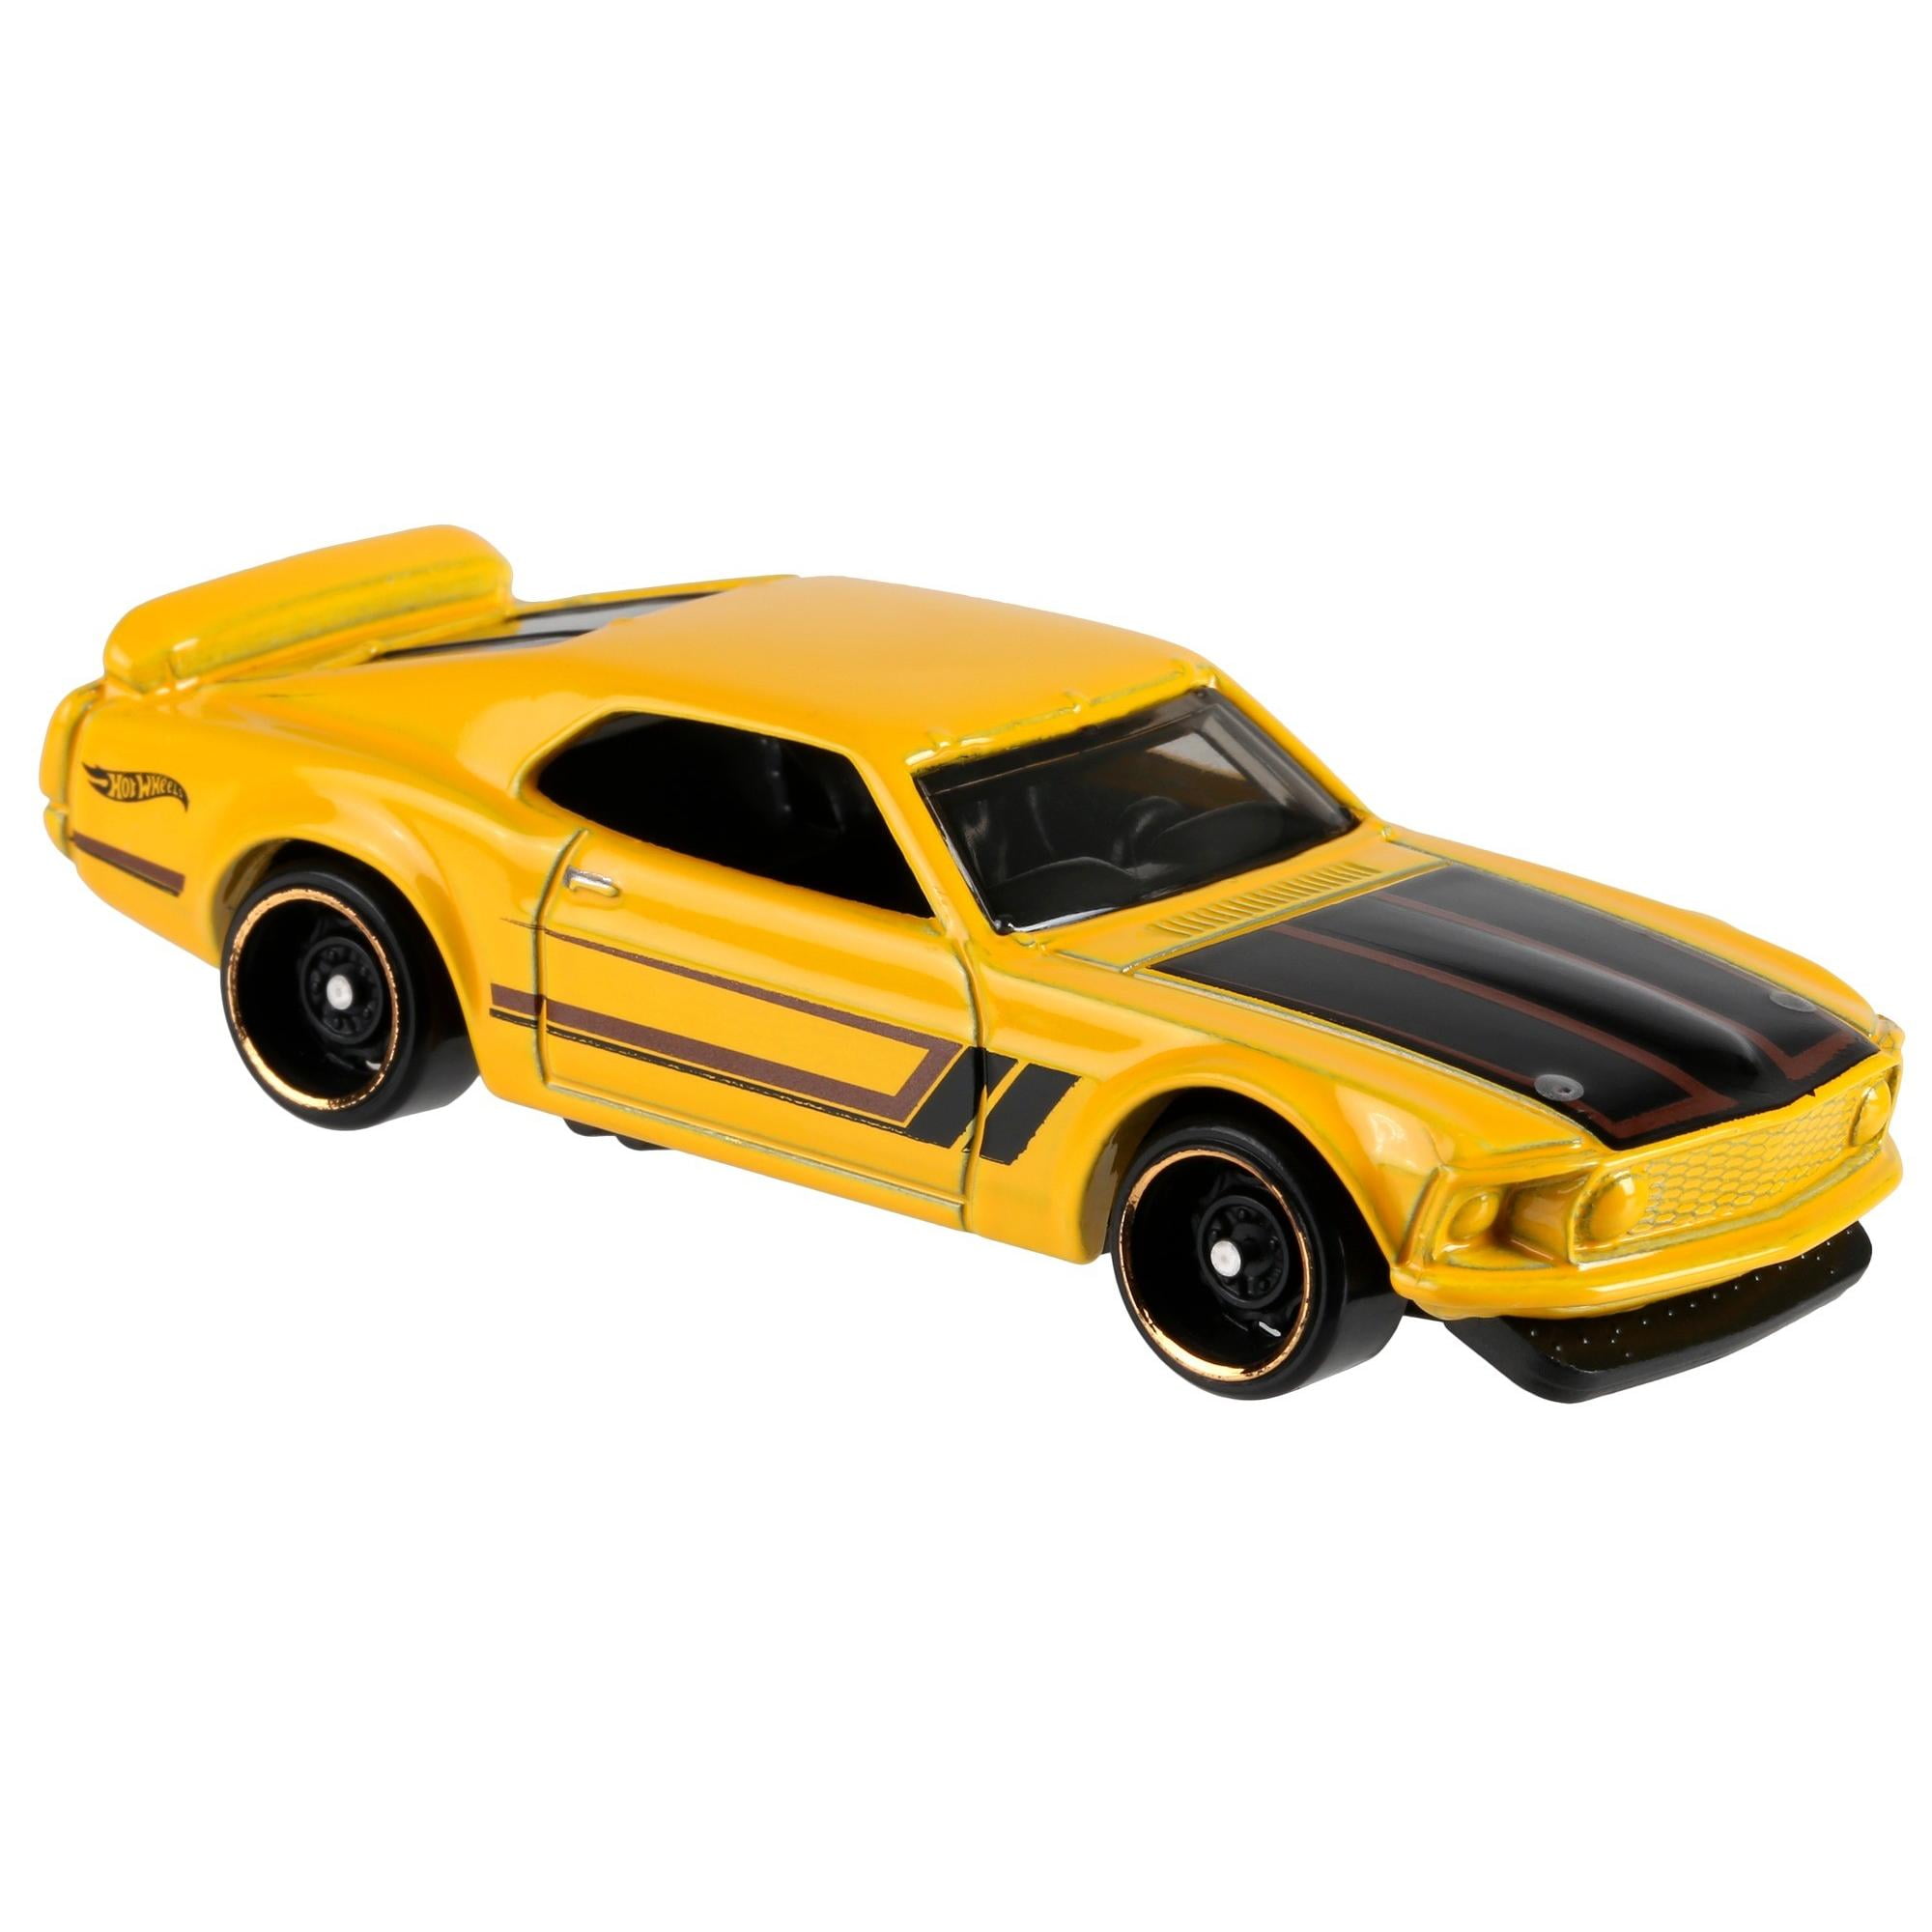 69 Mustang Boss 302 Muscle Machines Die Cast Scale 1 64 for sale online 